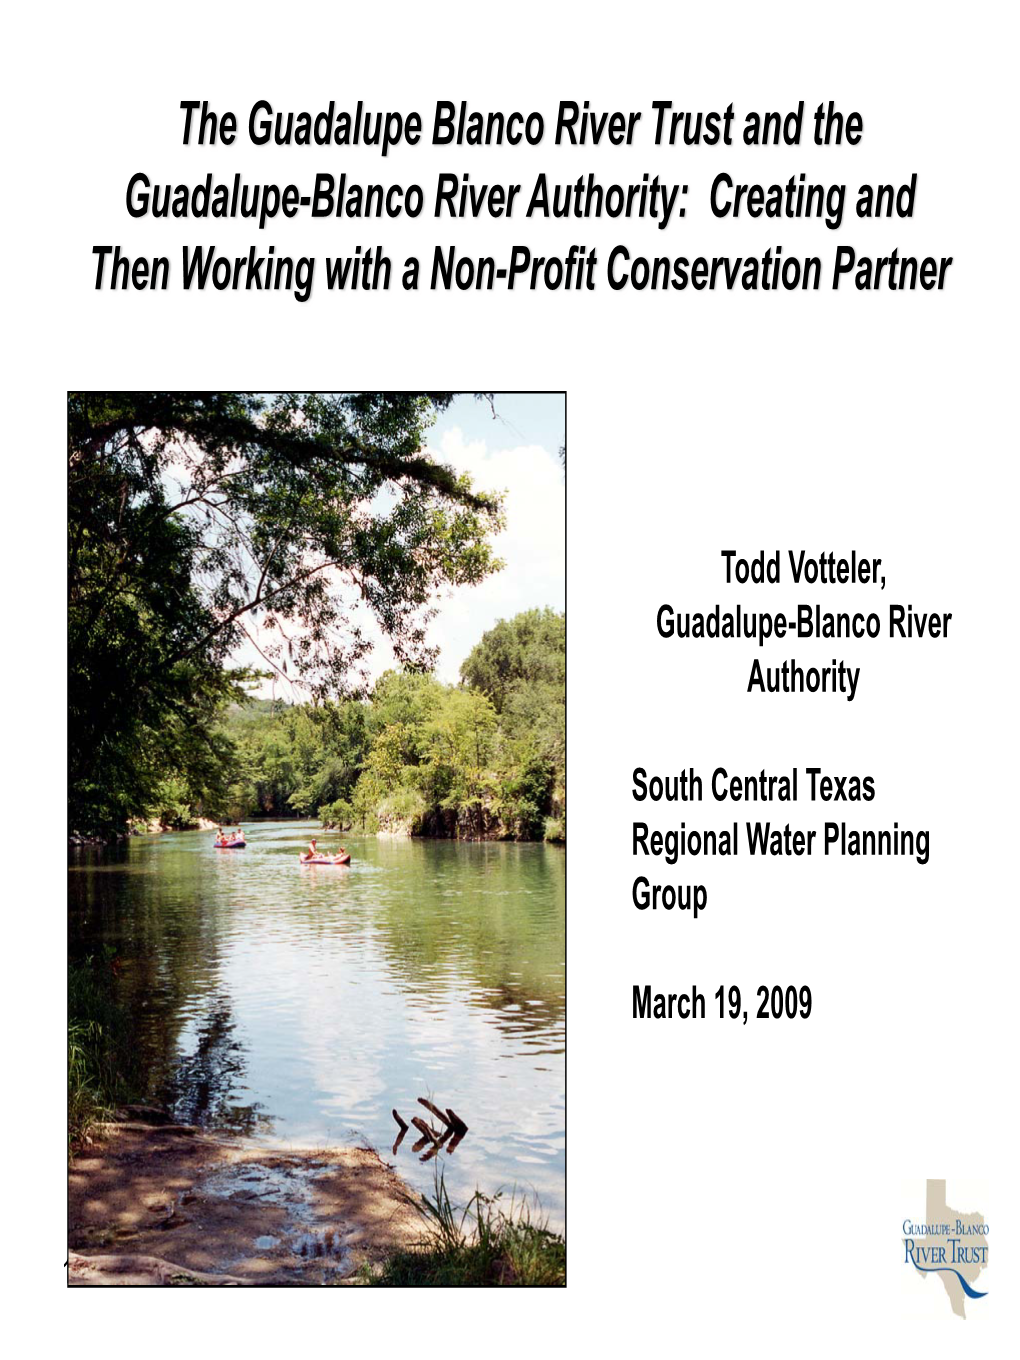 The Guadalupe Blanco River Trust and the Guadalupe-Blanco River Authority: Creating and Then Working with a Non-Profit Conservation Partner